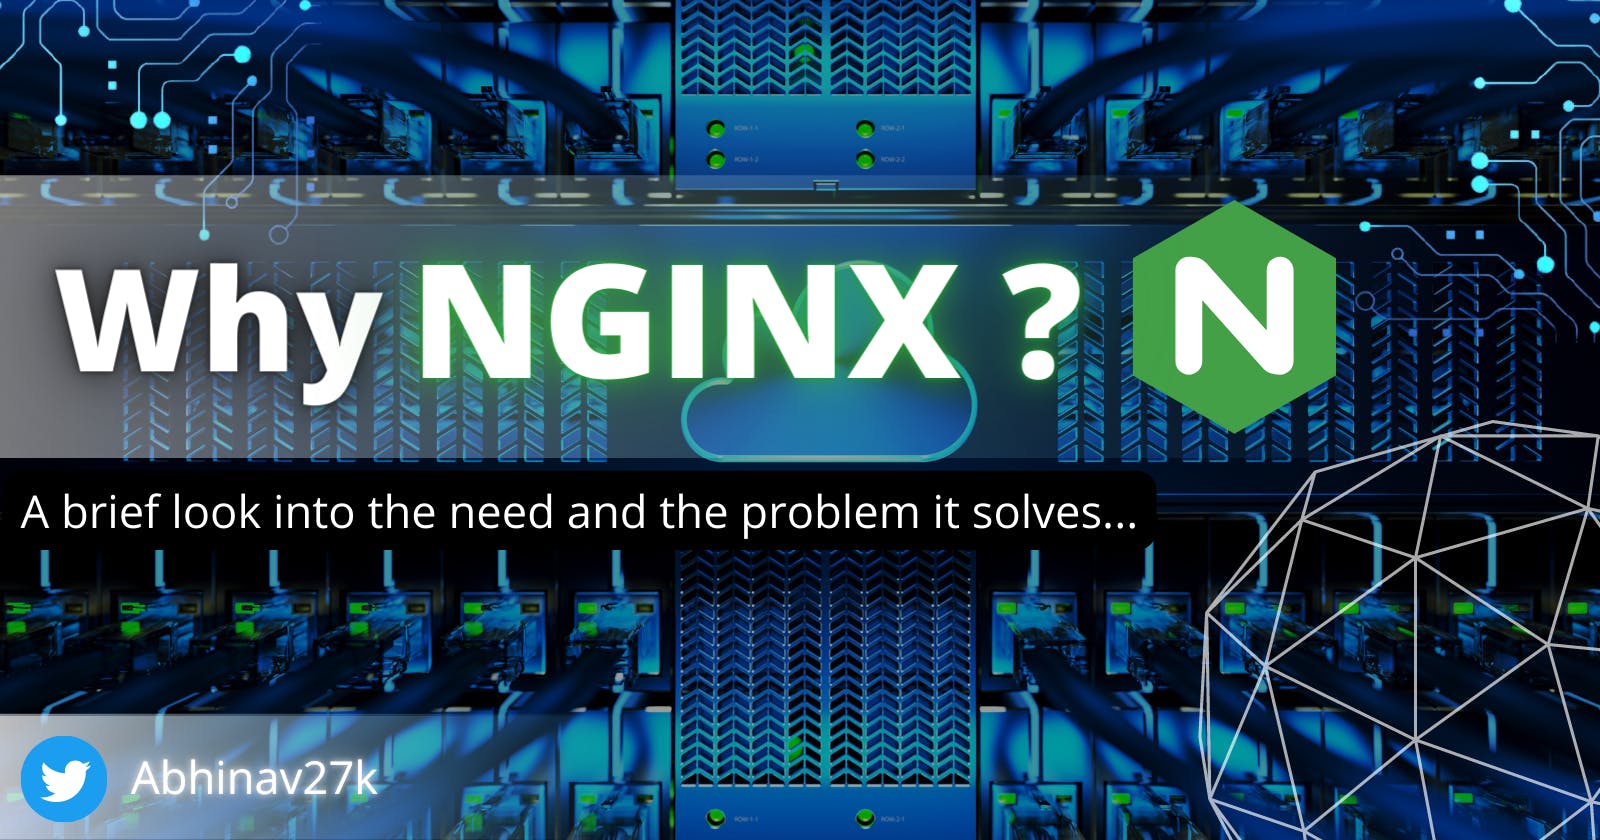 Why Nginx and How it works?